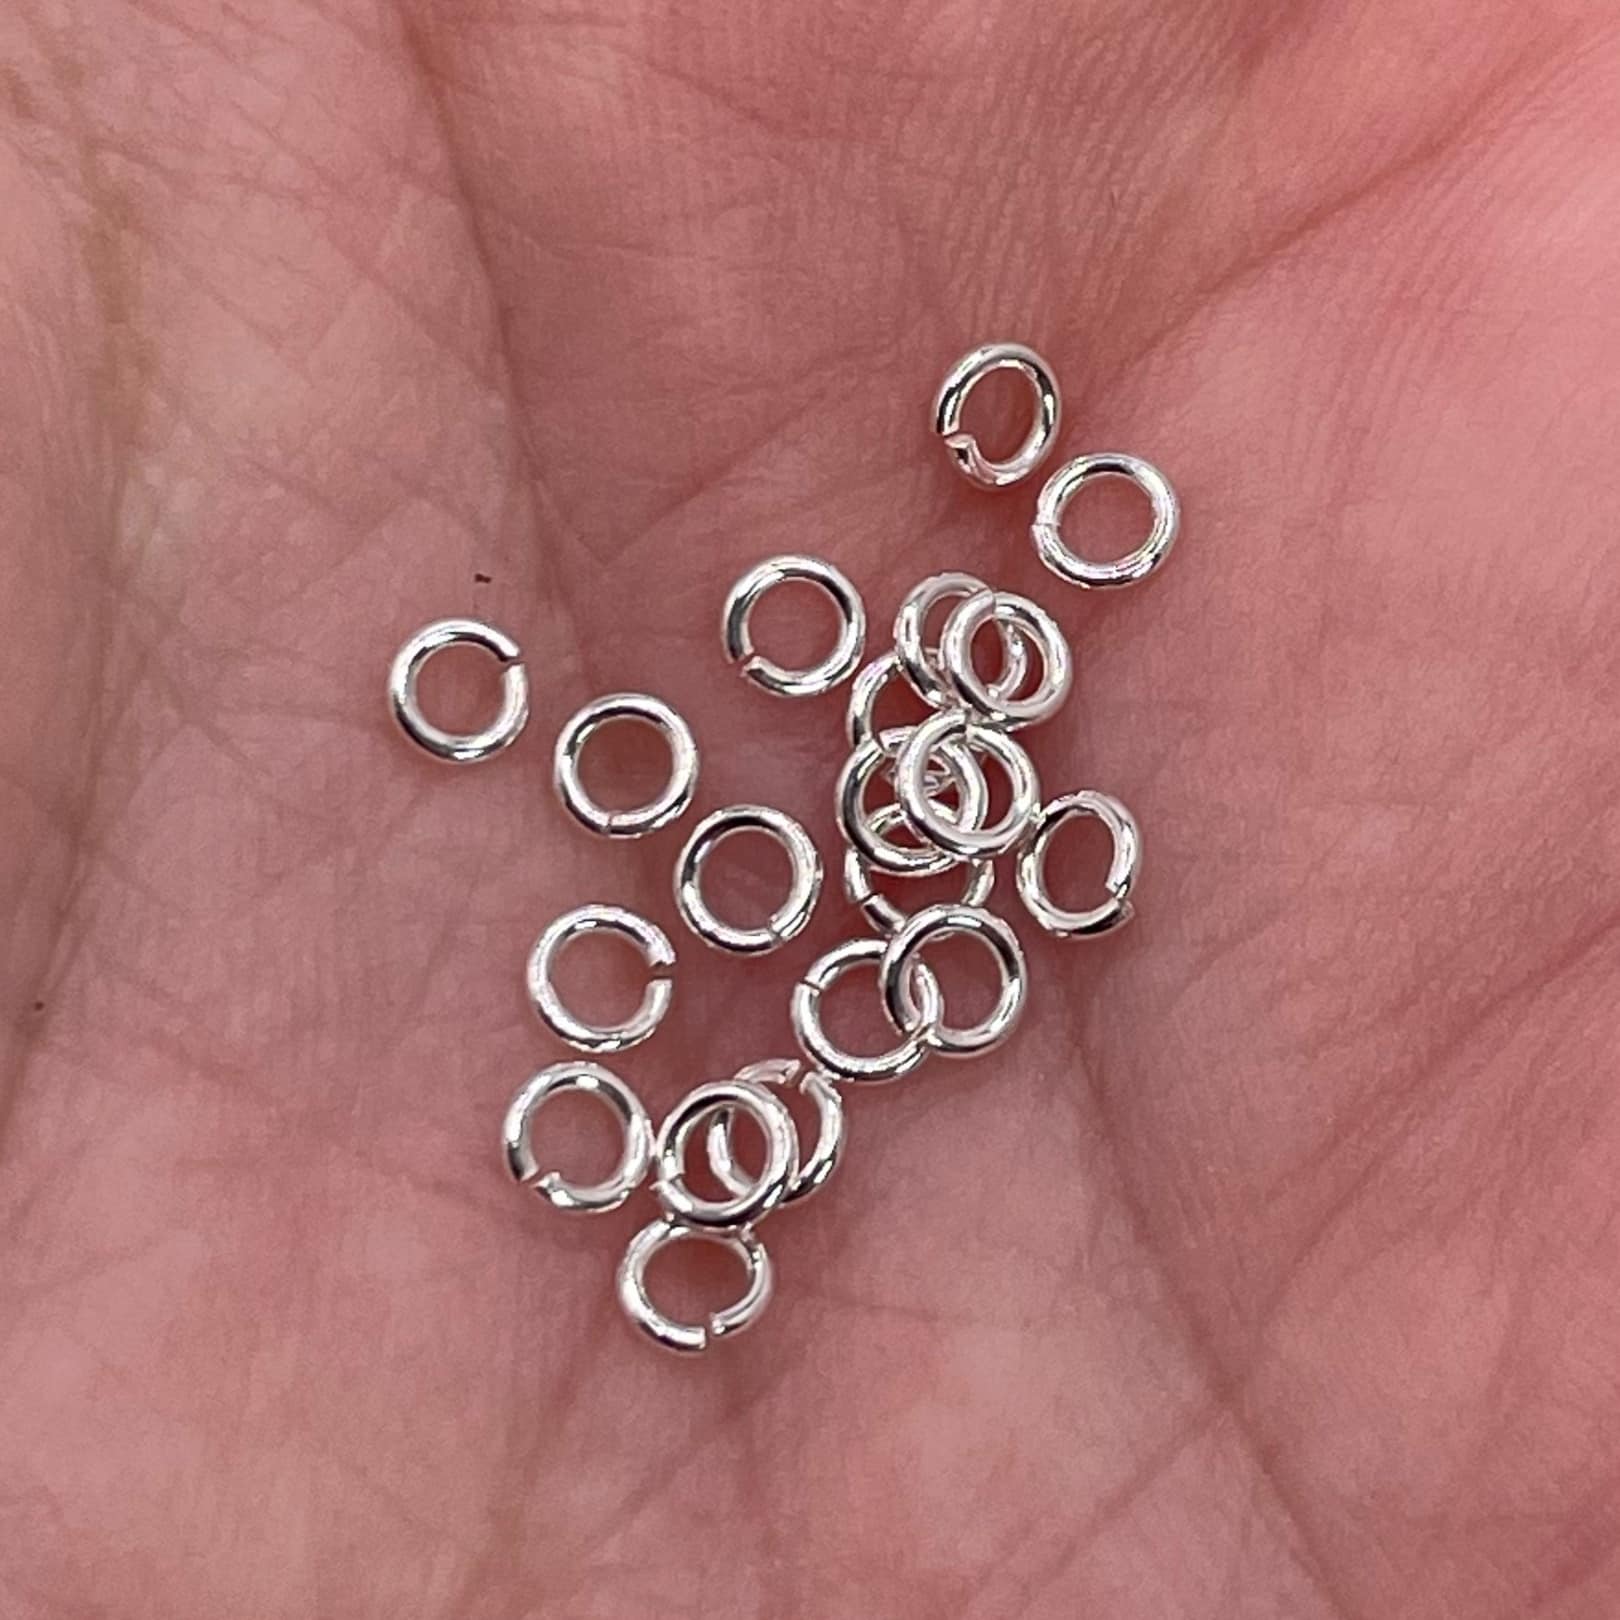 Actual photo of 925 Sterling Silver Jump Rings.